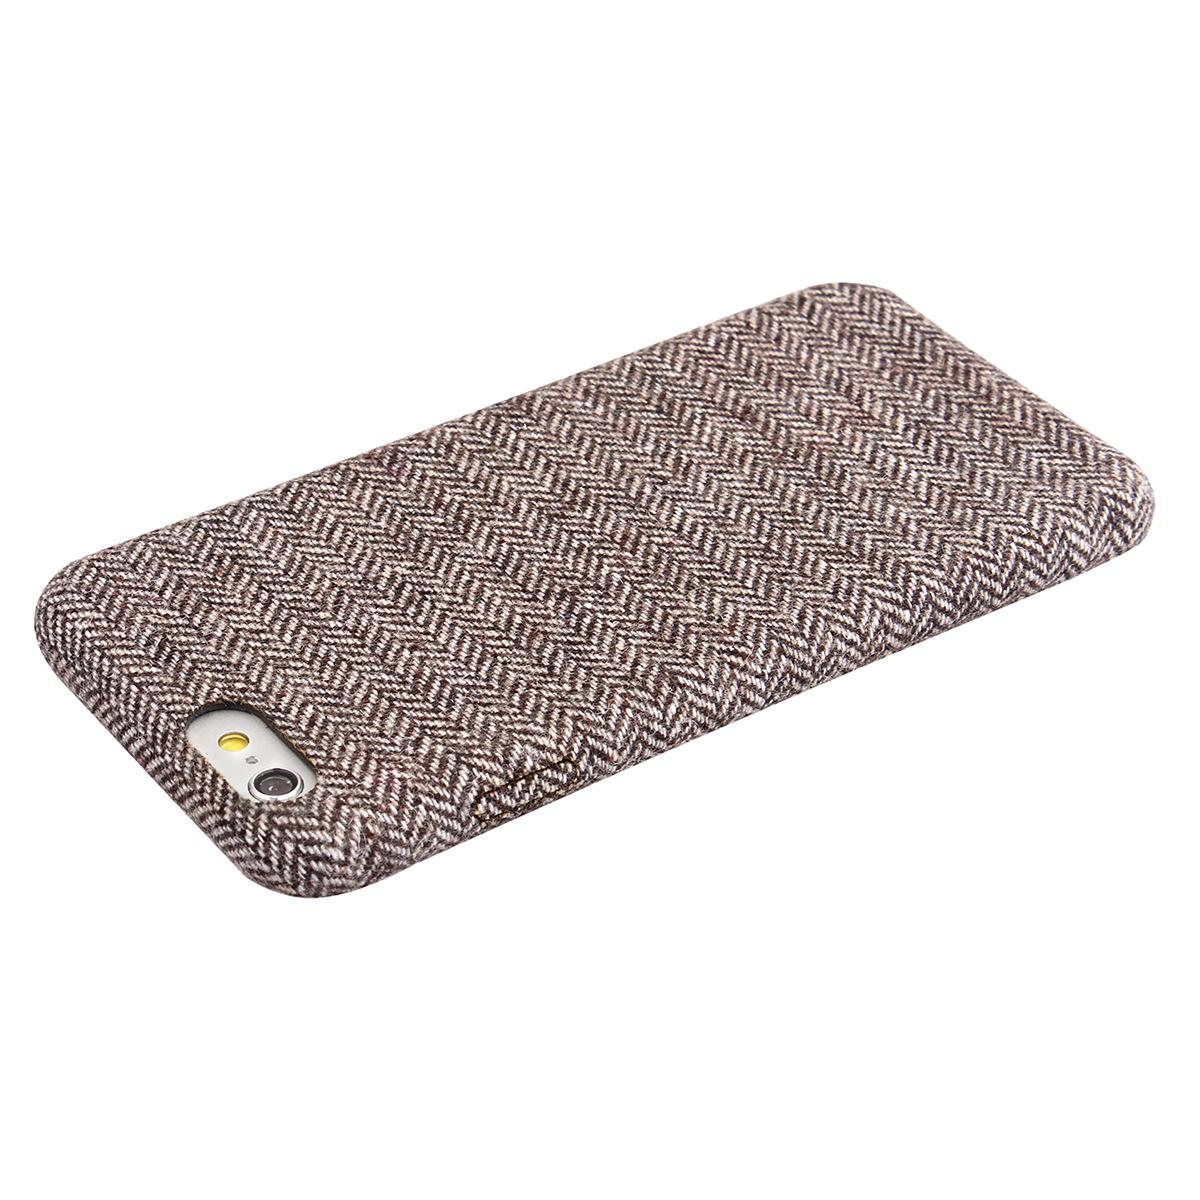 Retro England Grid Print Canvas Slim Hybrid Protective Case Cover for iPhone 6/6S - Gray